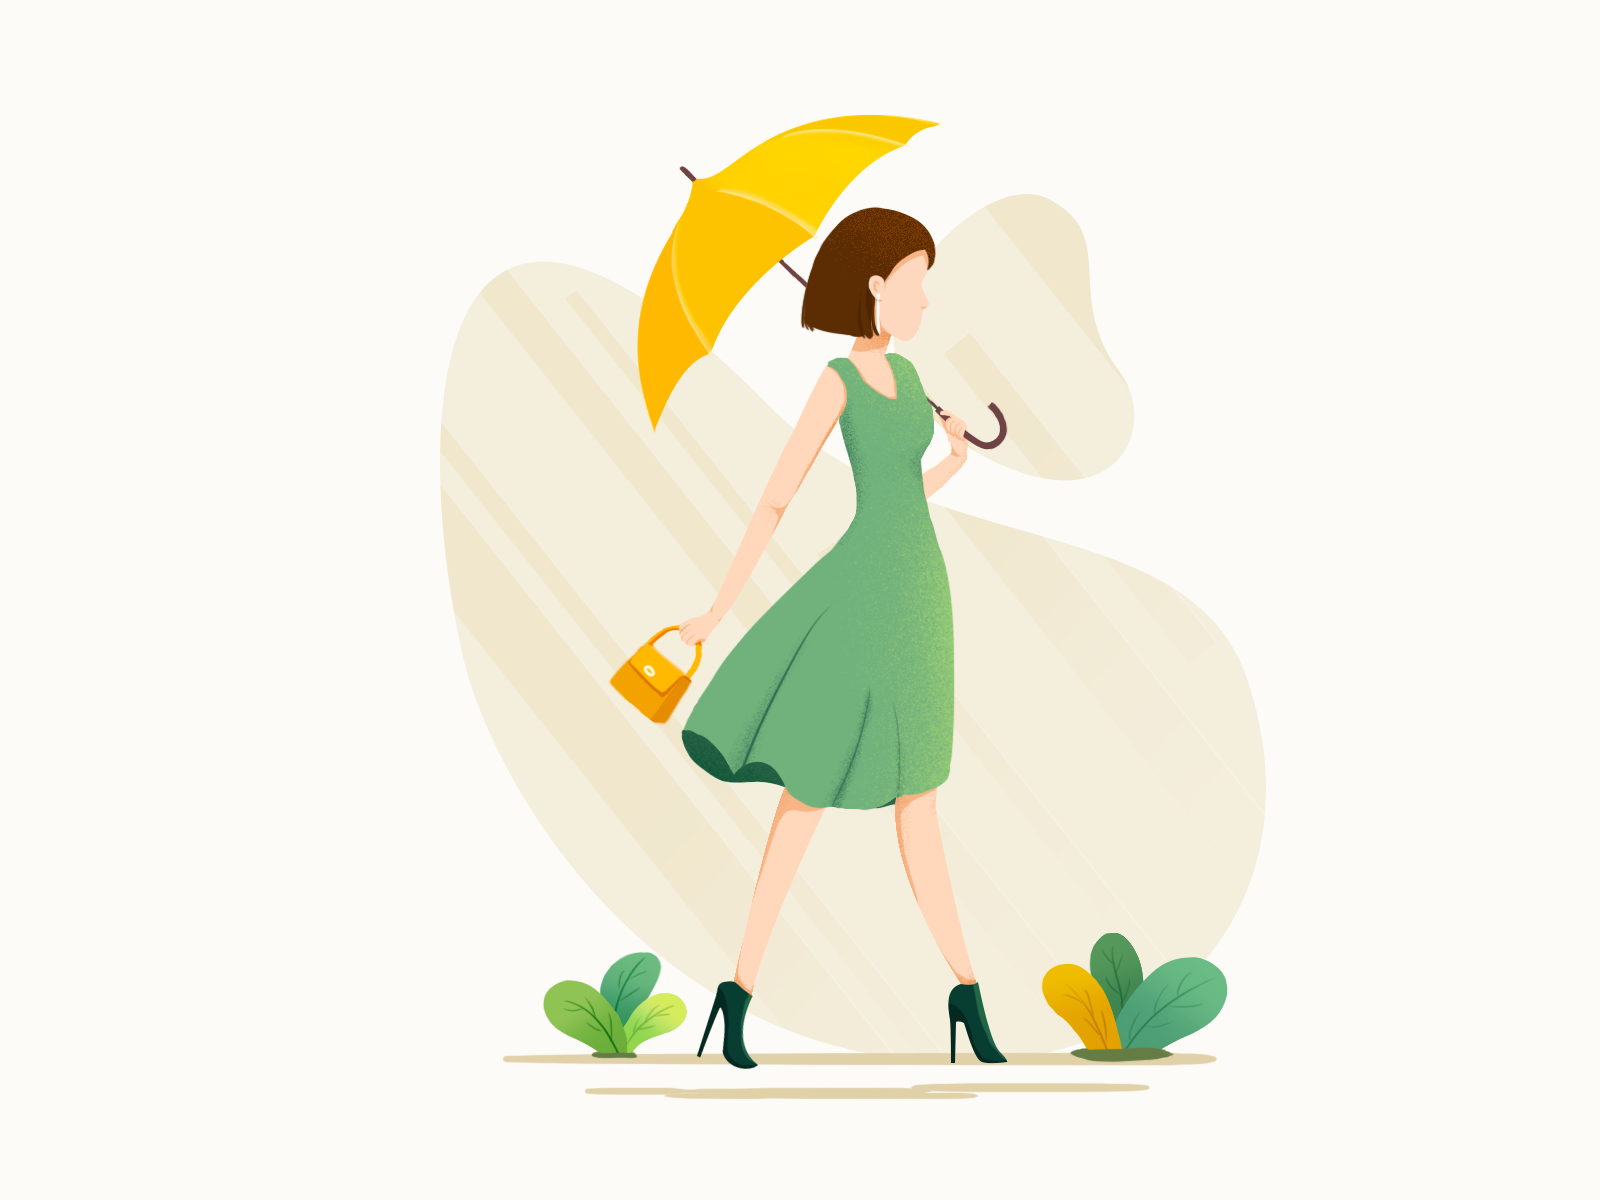 summer is comming! by Maya on Dribbble